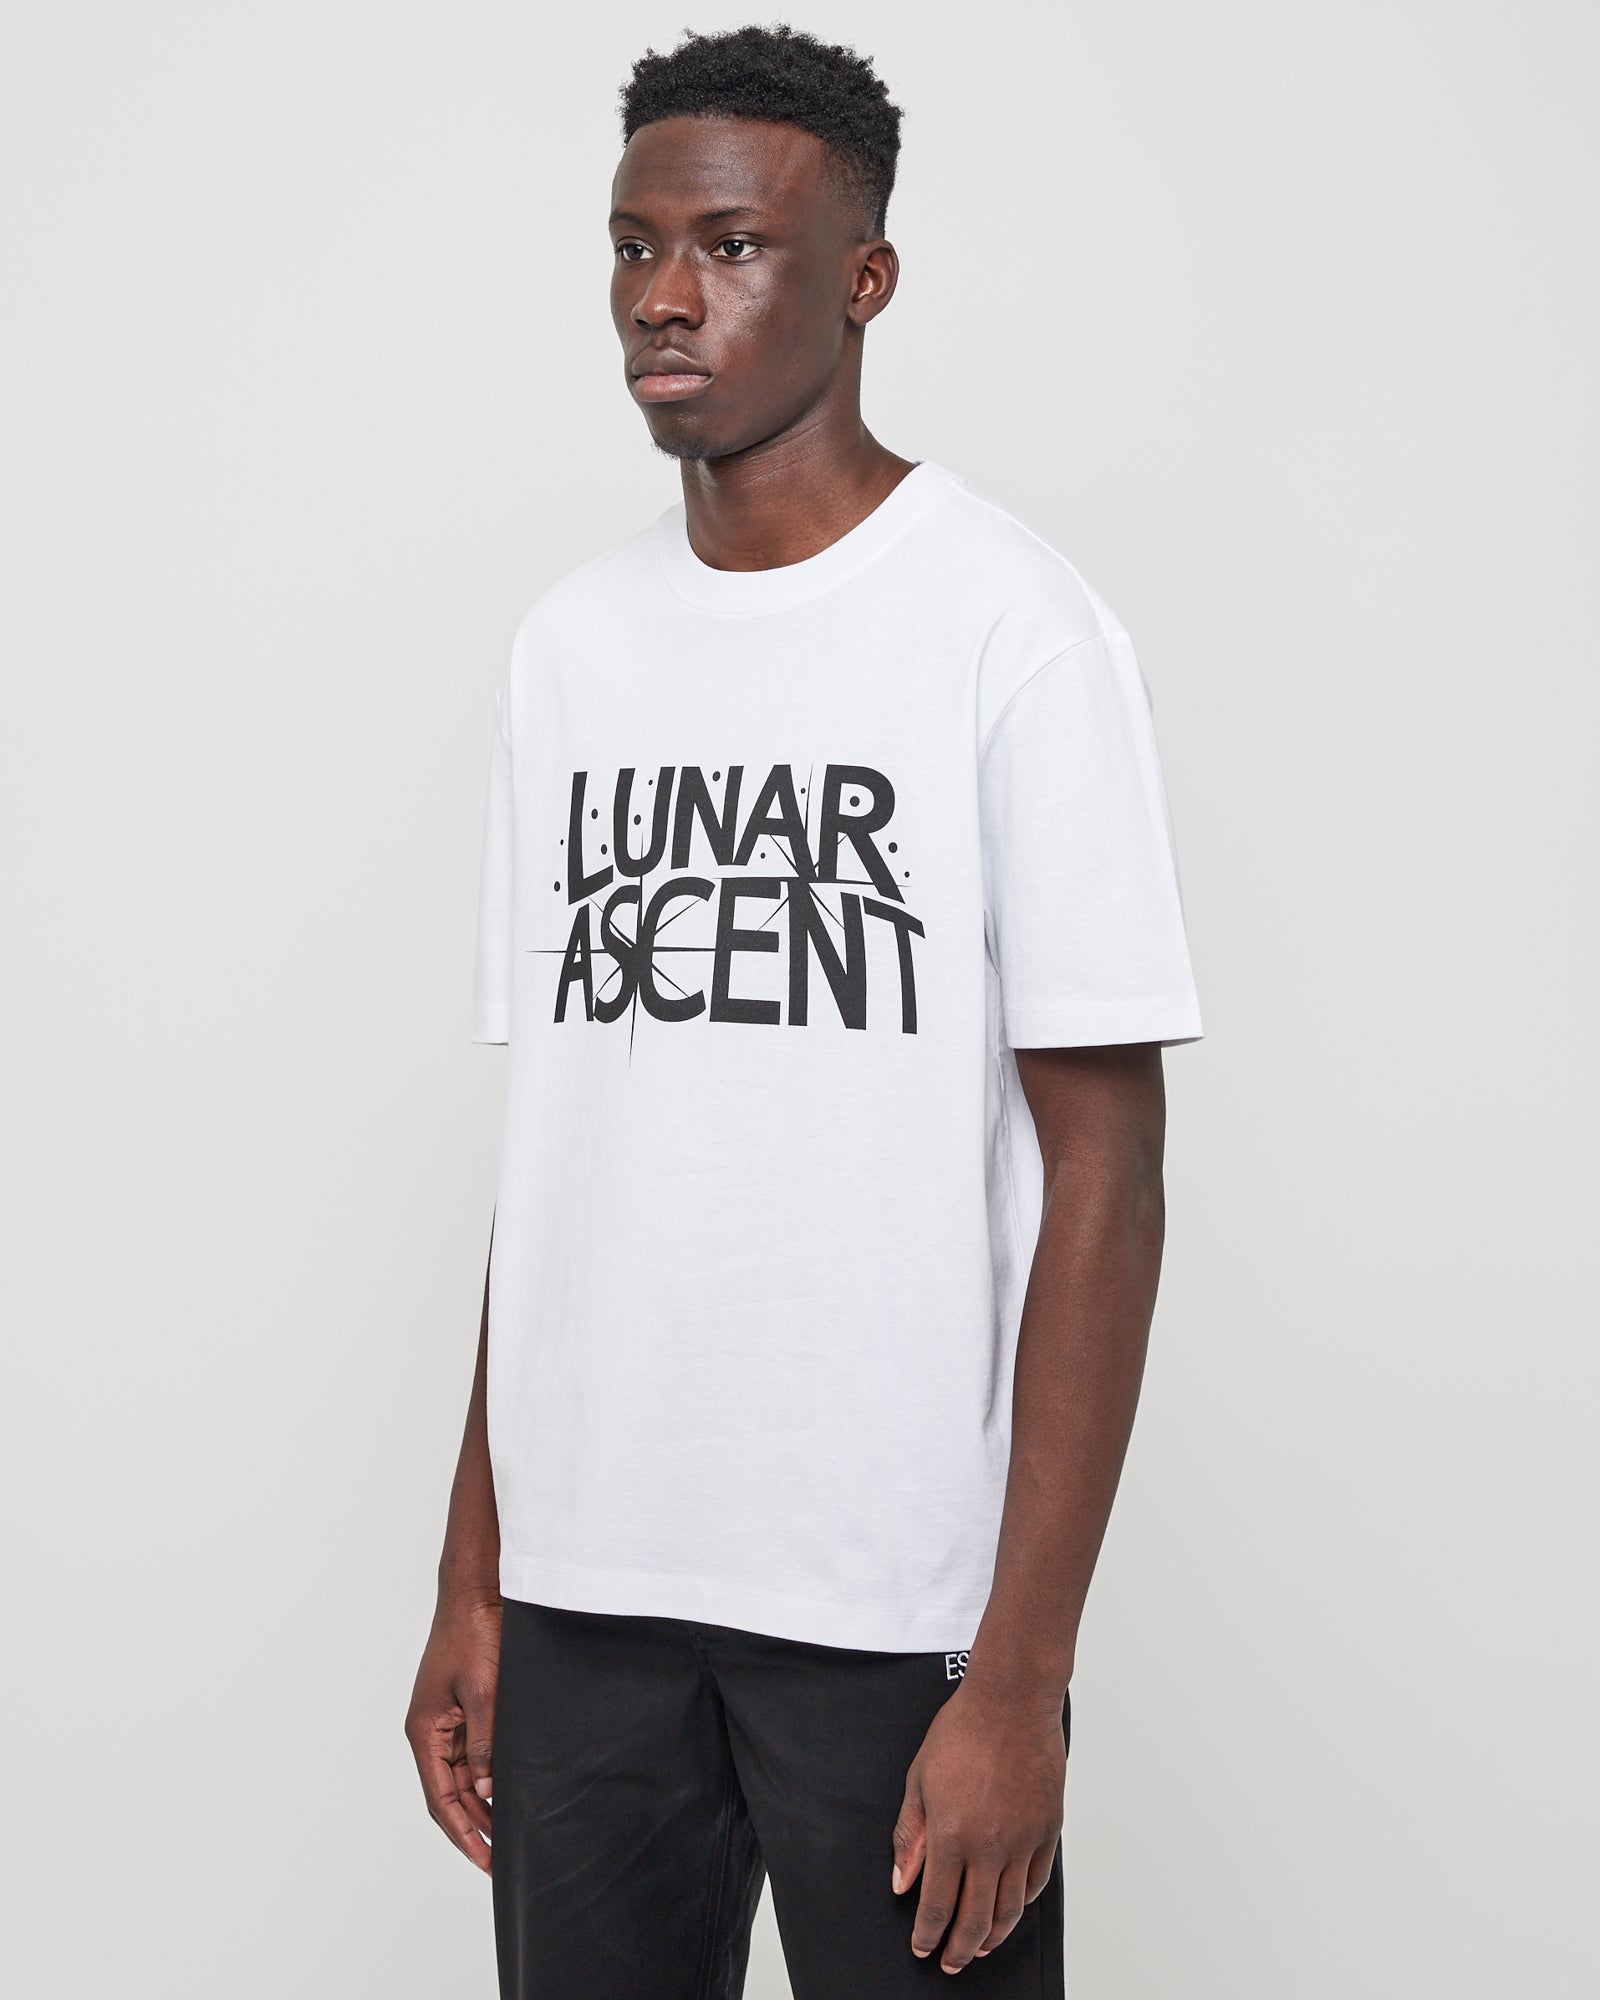 Lunar Ascent SS T-Shirt in White